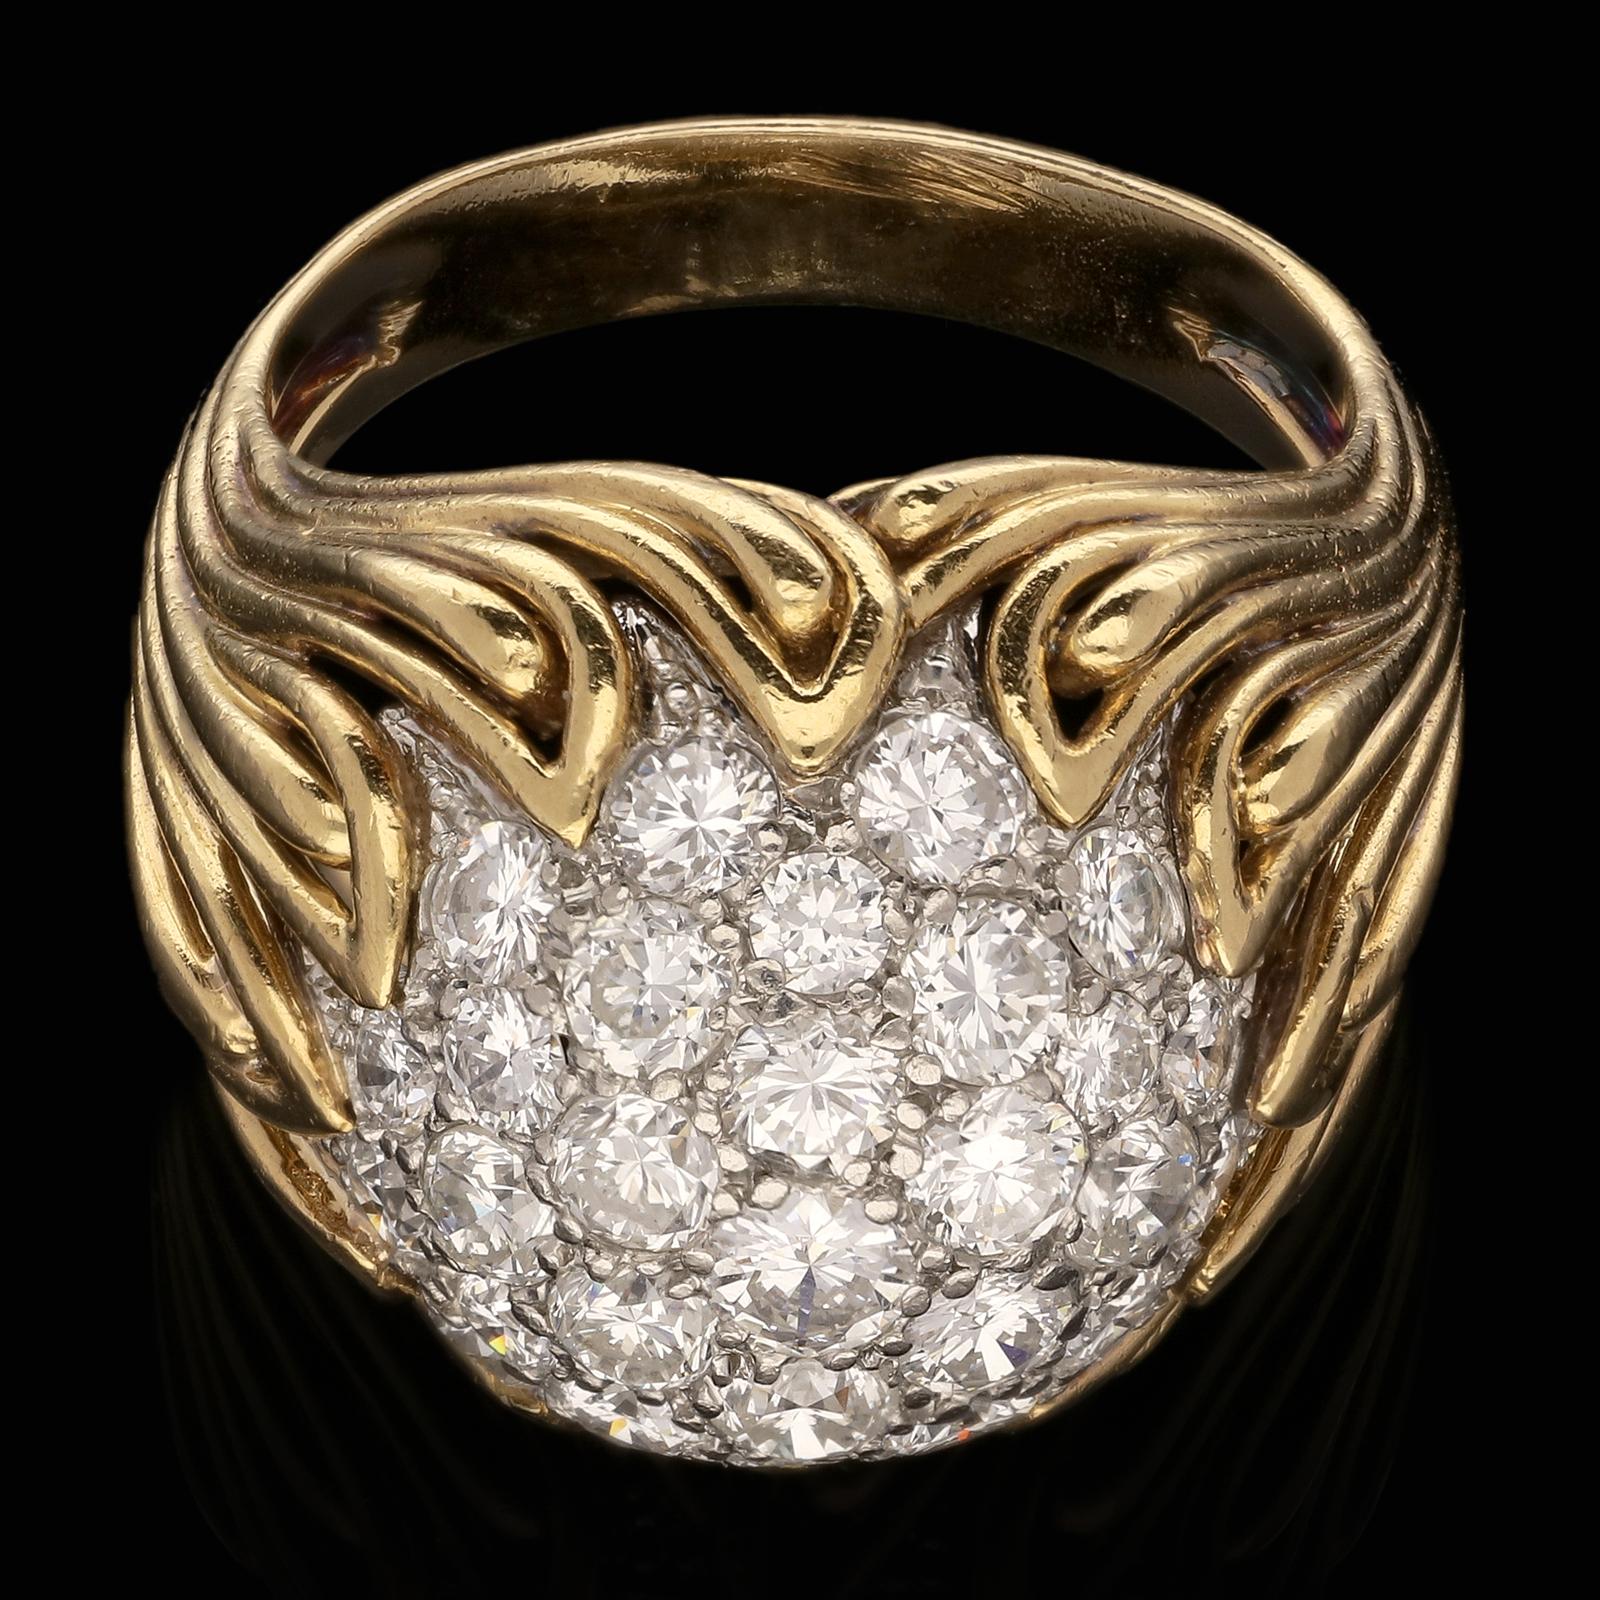 A beautiful diamond and gold bombe dress ring by Van Cleef & Arpels c.1959, centred with a circular dome of pavé set round brilliant cut diamonds in platinum surrounded by an 18ct yellow gold openwork mount of flame-like design, formed of multiple